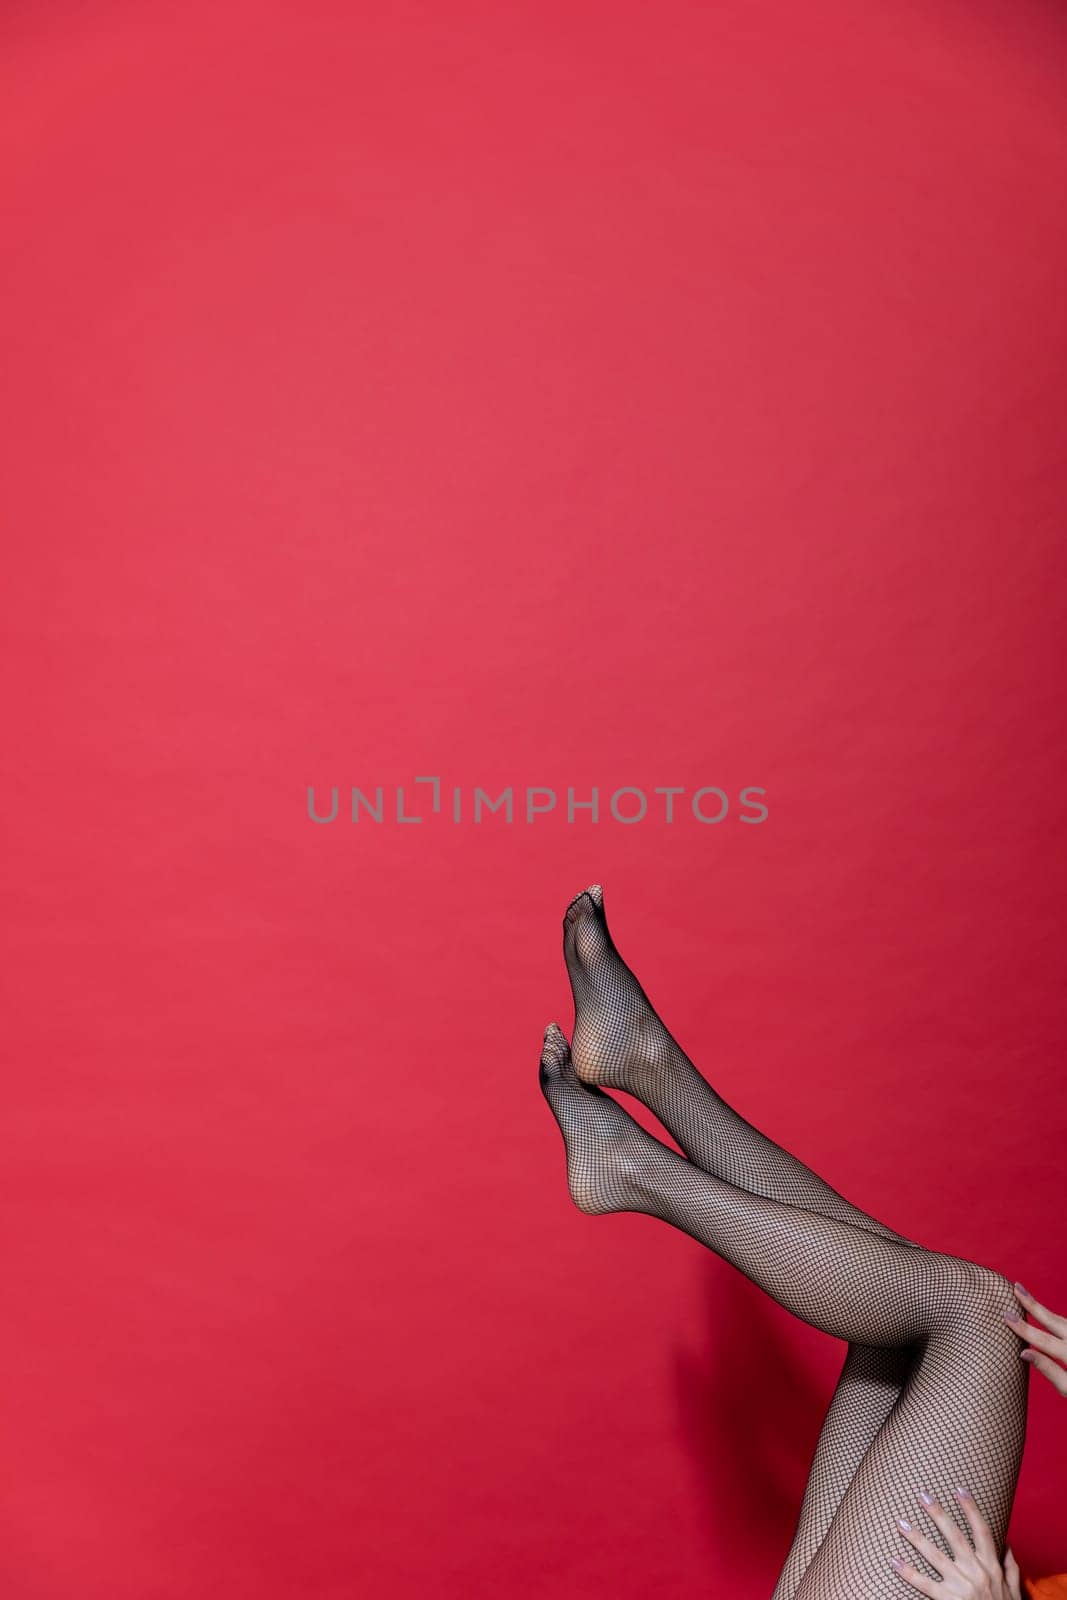 women's slender legs in mesh tights on red background